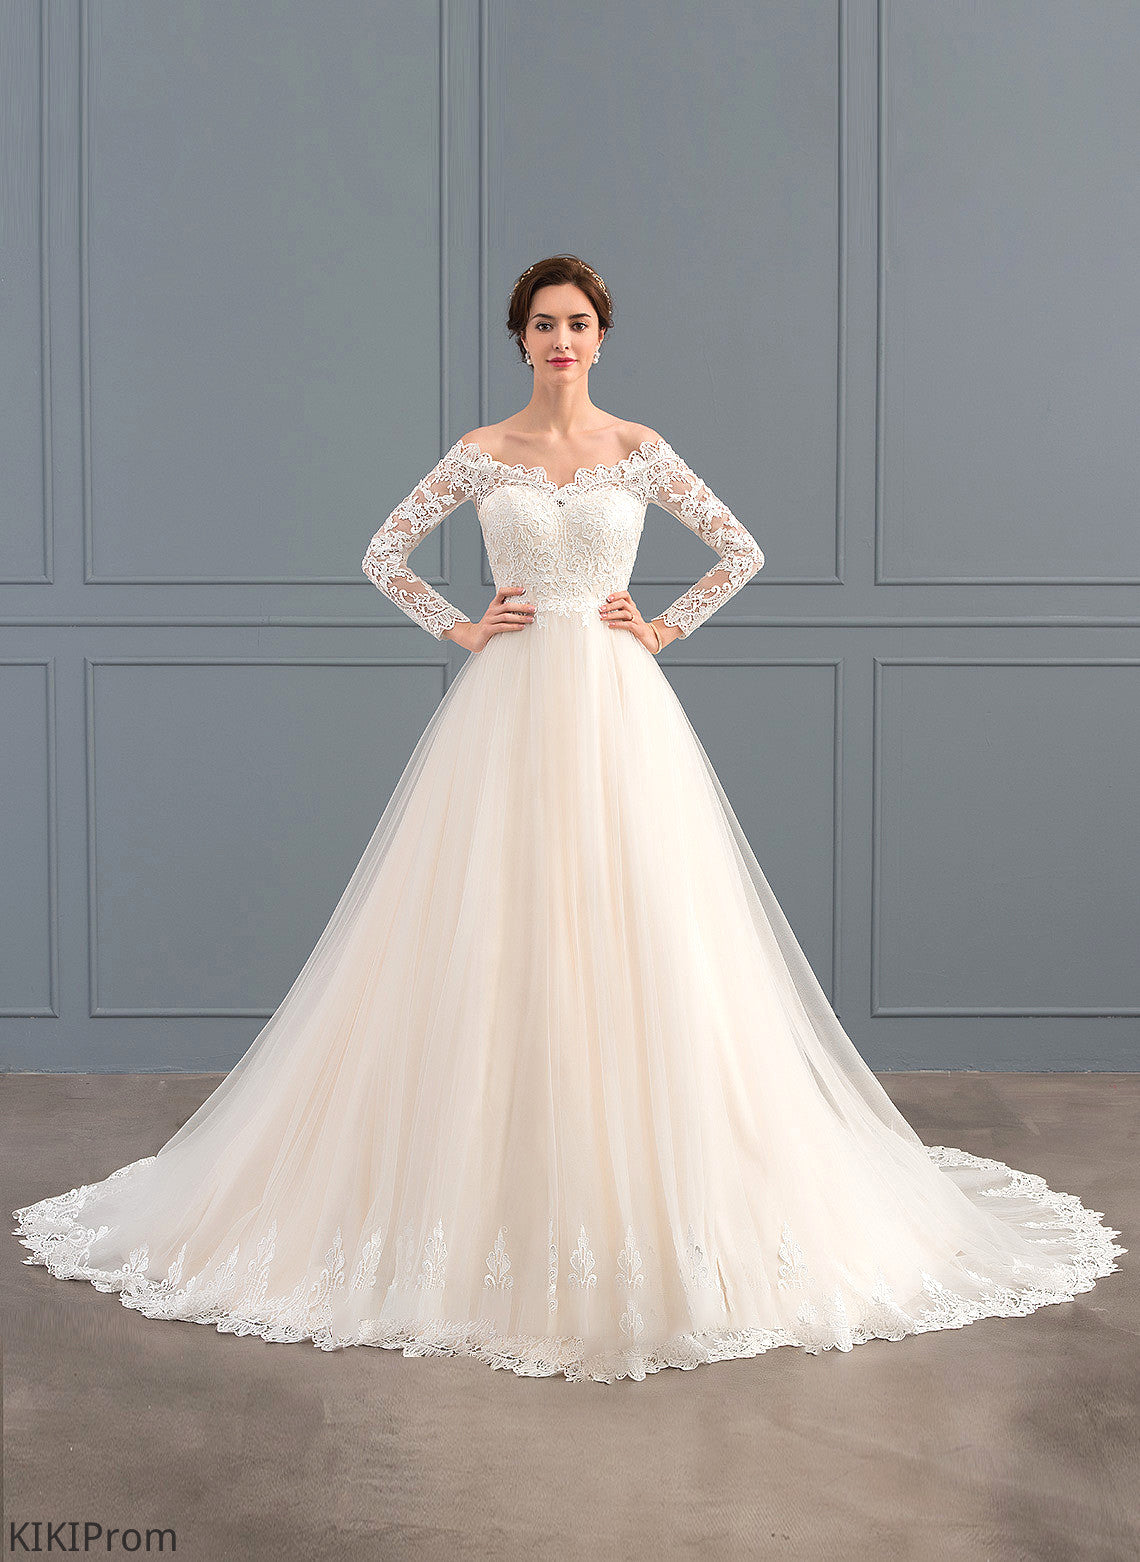 Kailee Chapel Wedding Dress Ball-Gown/Princess Train Wedding Dresses Tulle Lace